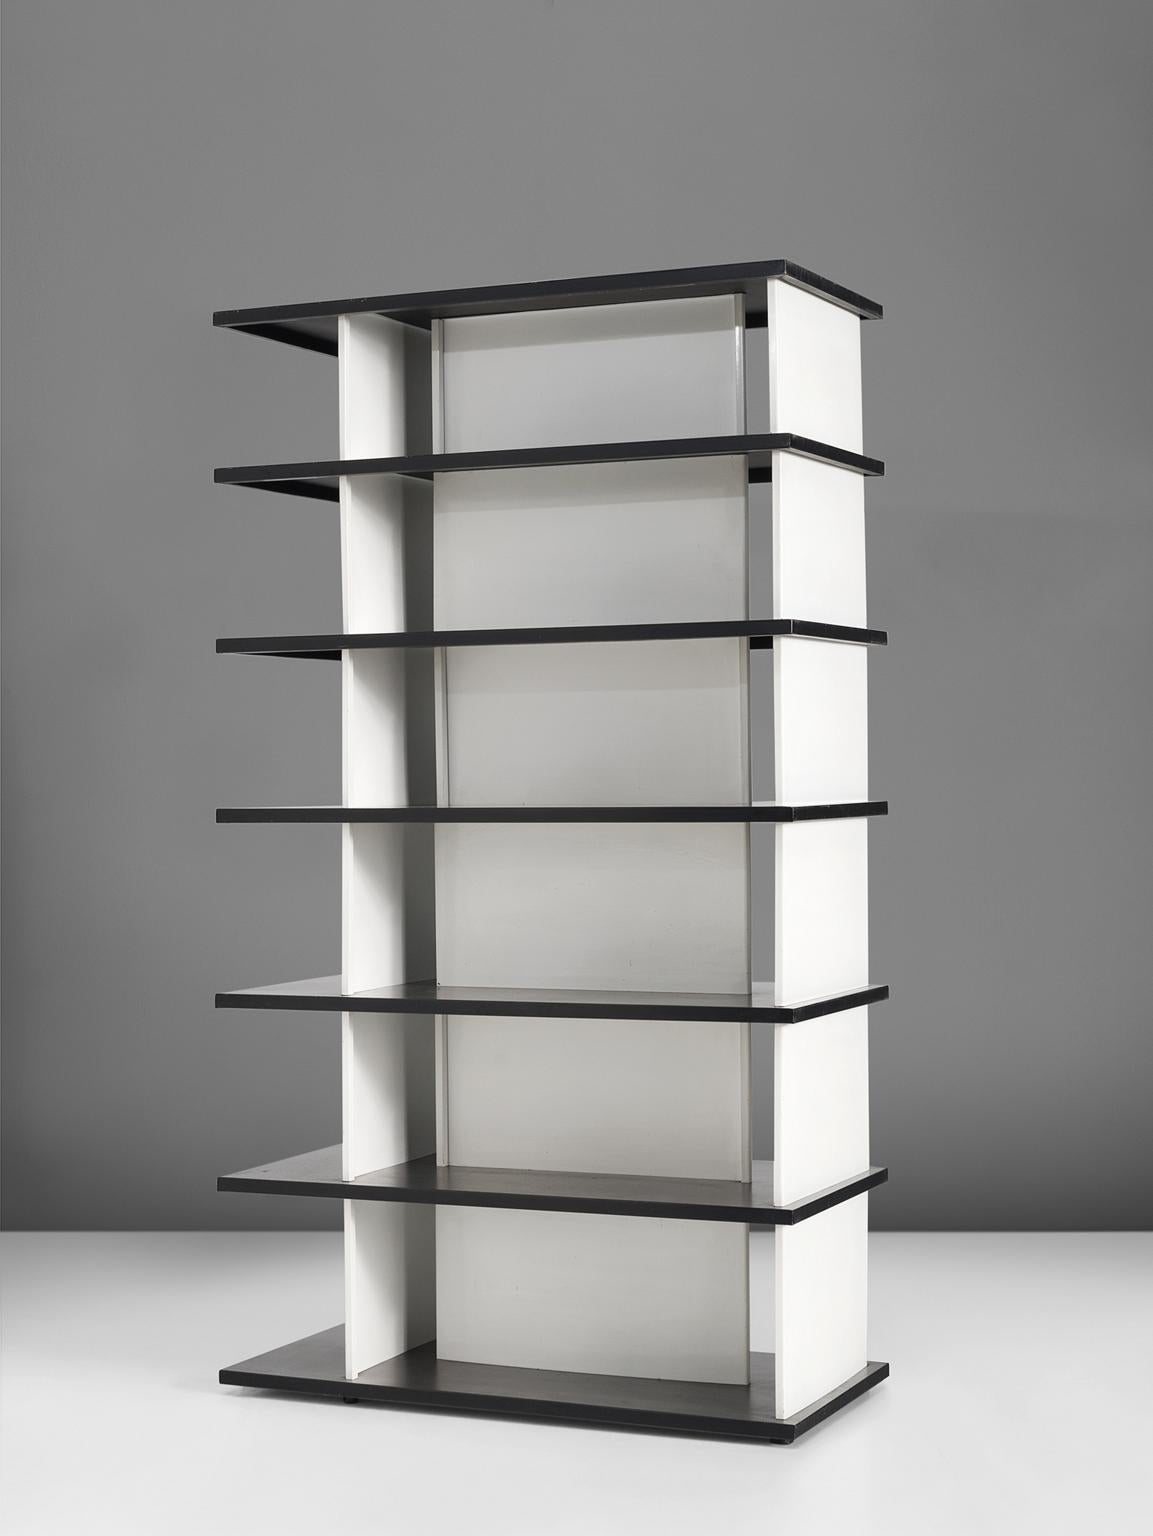 Wim Rietveld, bookcase, enameled metal, the Netherlands, 1960.

This self supporting bookcase was originally made for 'De Bijenkorf', a Dutch high end department store in 1960. The piece consists of seven black enameled shelves and can be used on